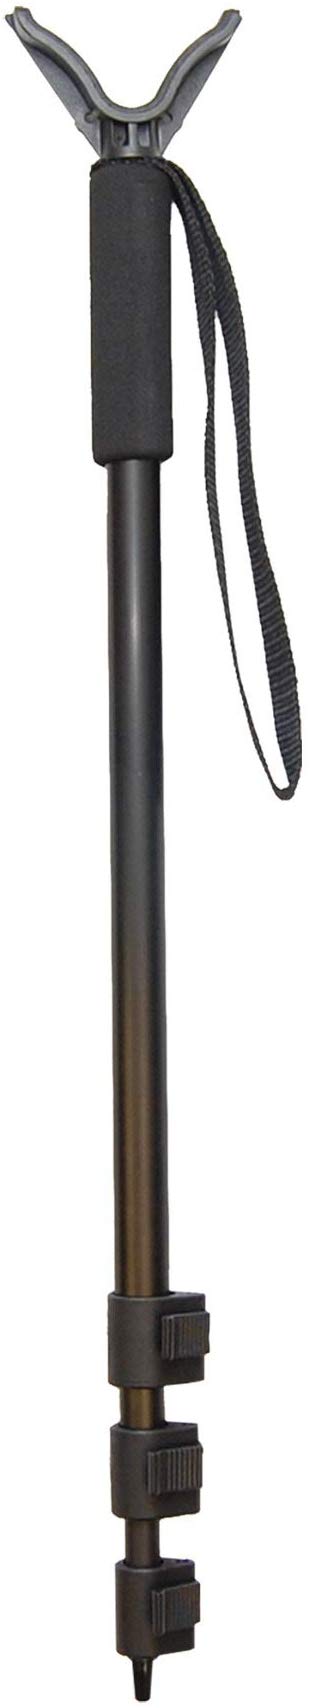 Allen Company Shooting Stick, Monopod, Adjustable in Height (21.5 to 61 inches), Aluminium, Hunting Accessories, Black